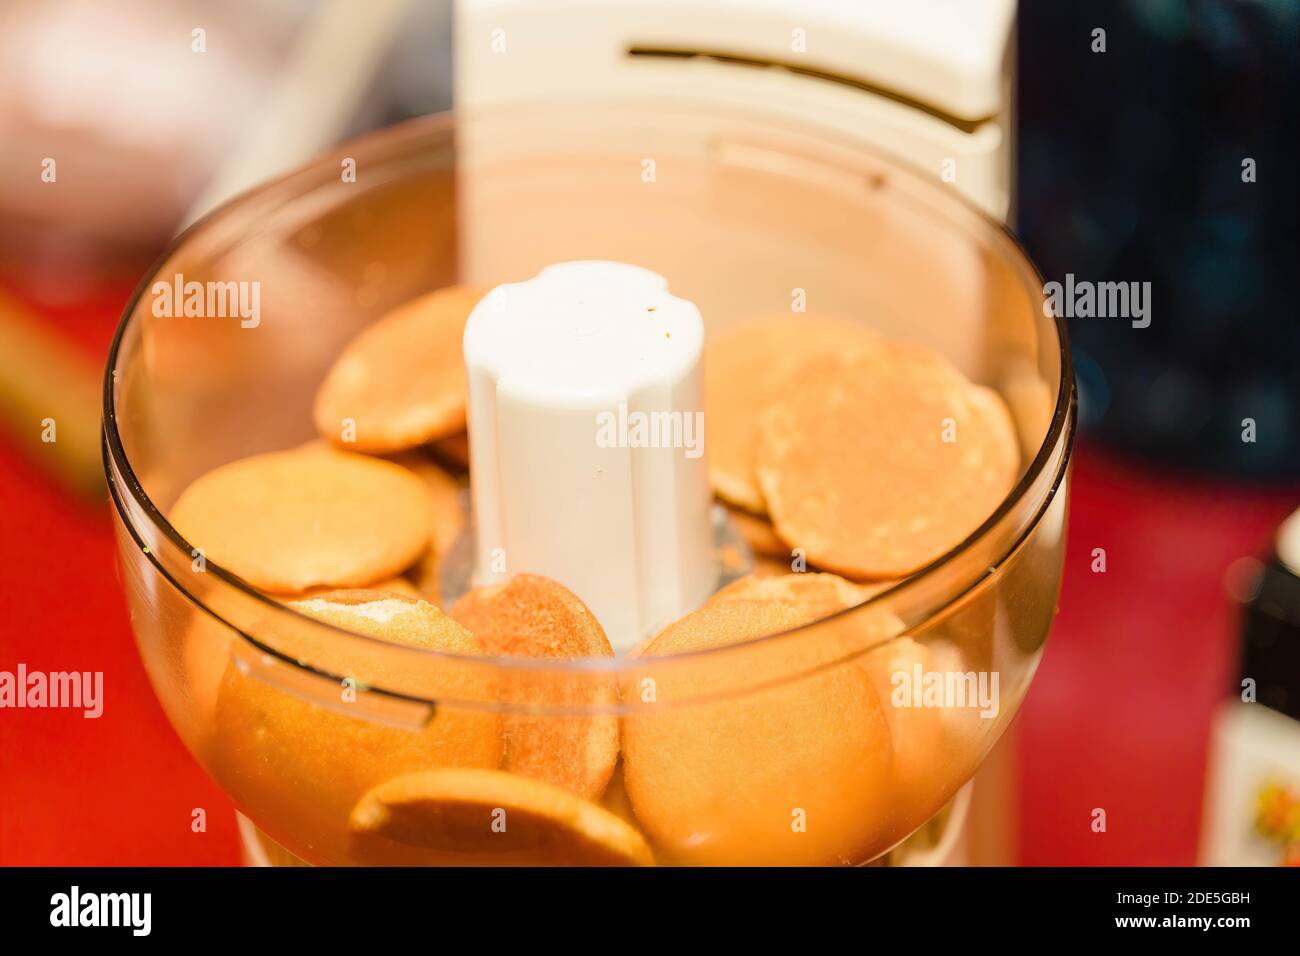 vanilla wafer cookies in a food processor waiting to be ground up Stock Photo